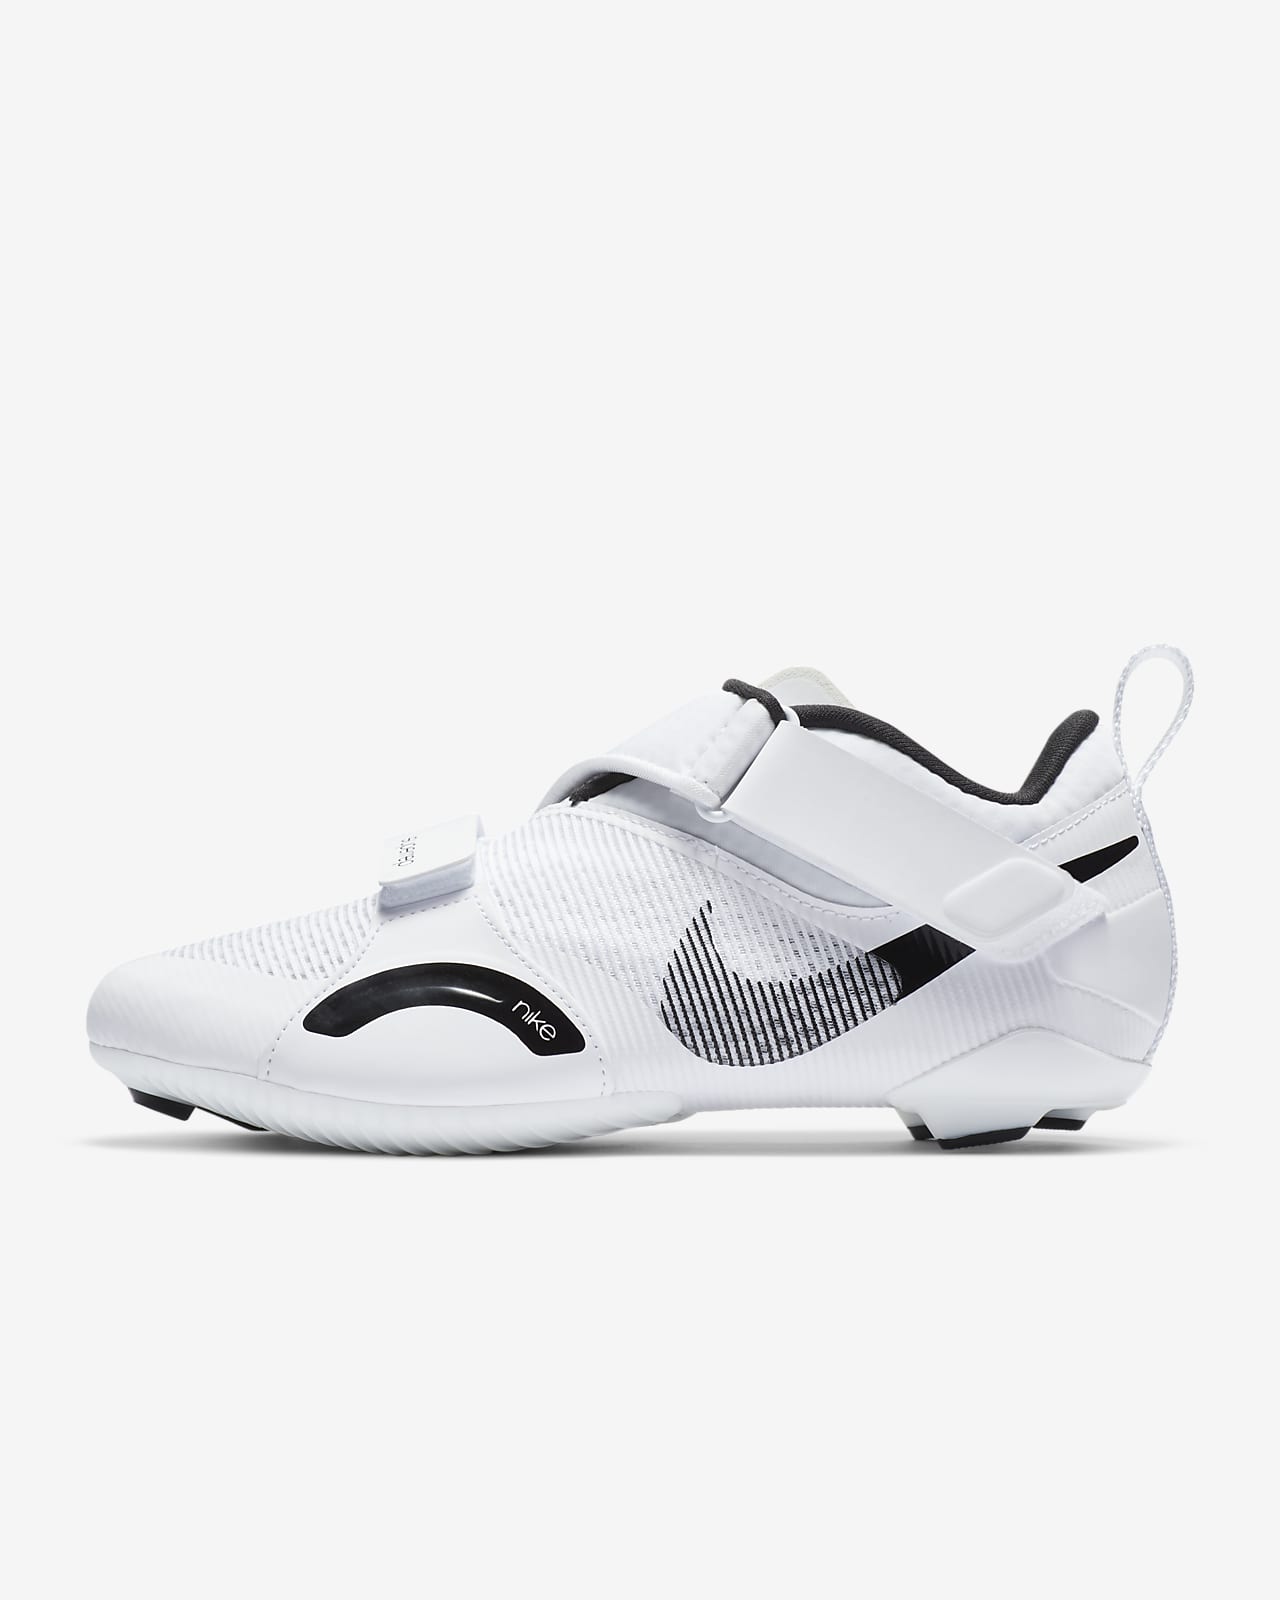 nike superrep indoor cycling shoes